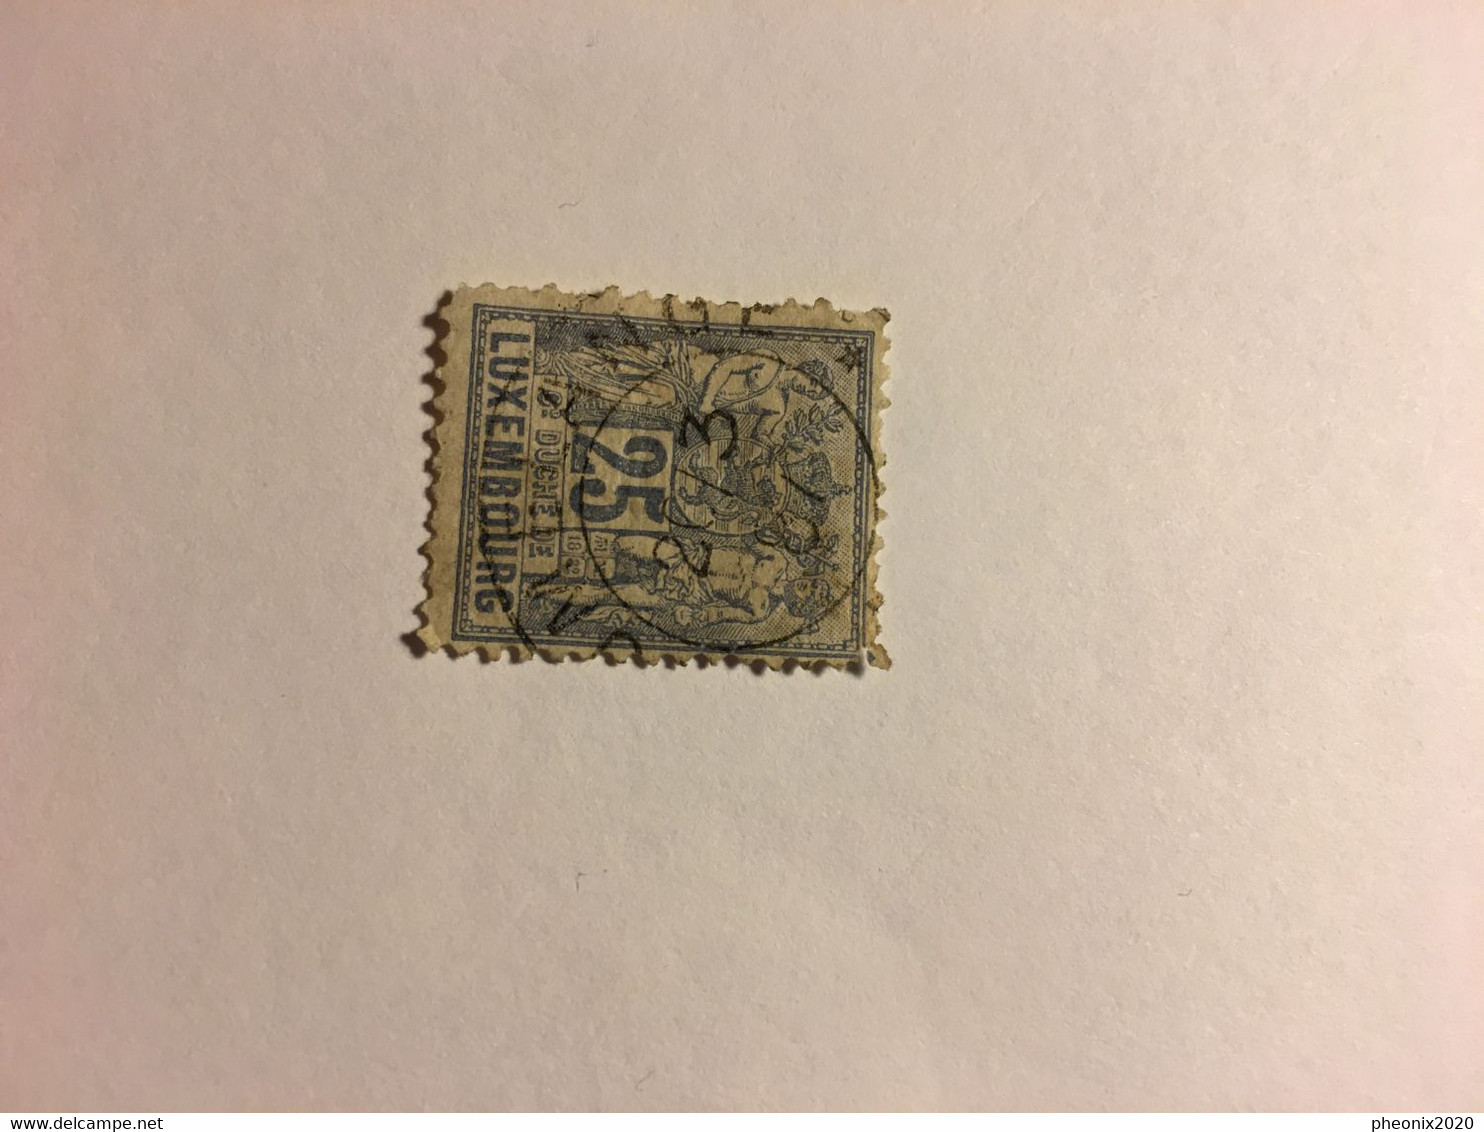 Luxembourg Stamp Used - 1882 Allégorie